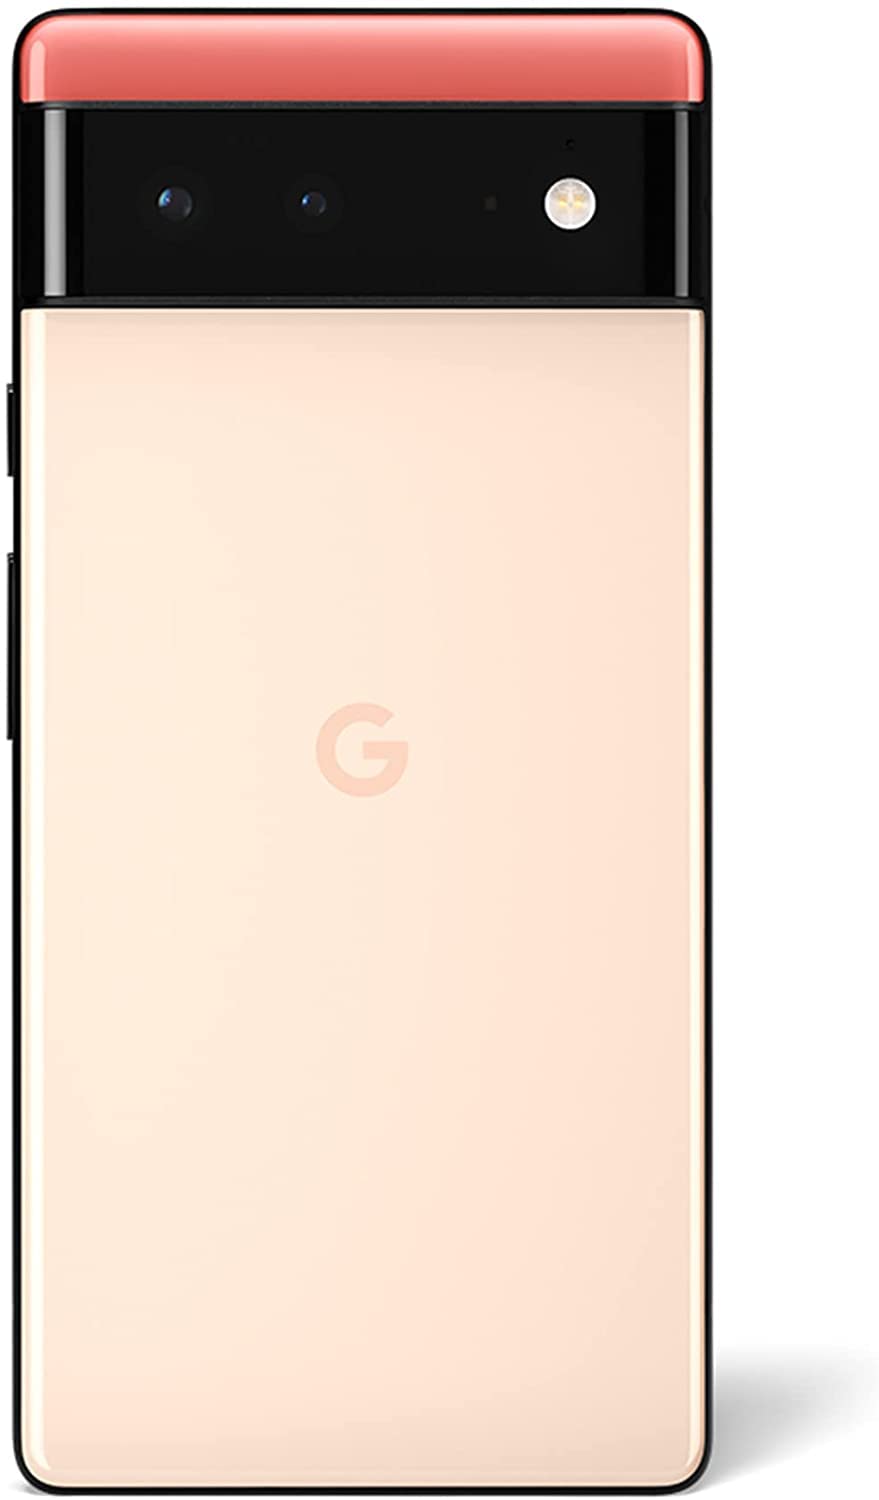 Google Pixel 6 – 5G Android Phone - Unlocked Smartphone with Wide and Ultrawide Lens - 128GB - Kinda Coral